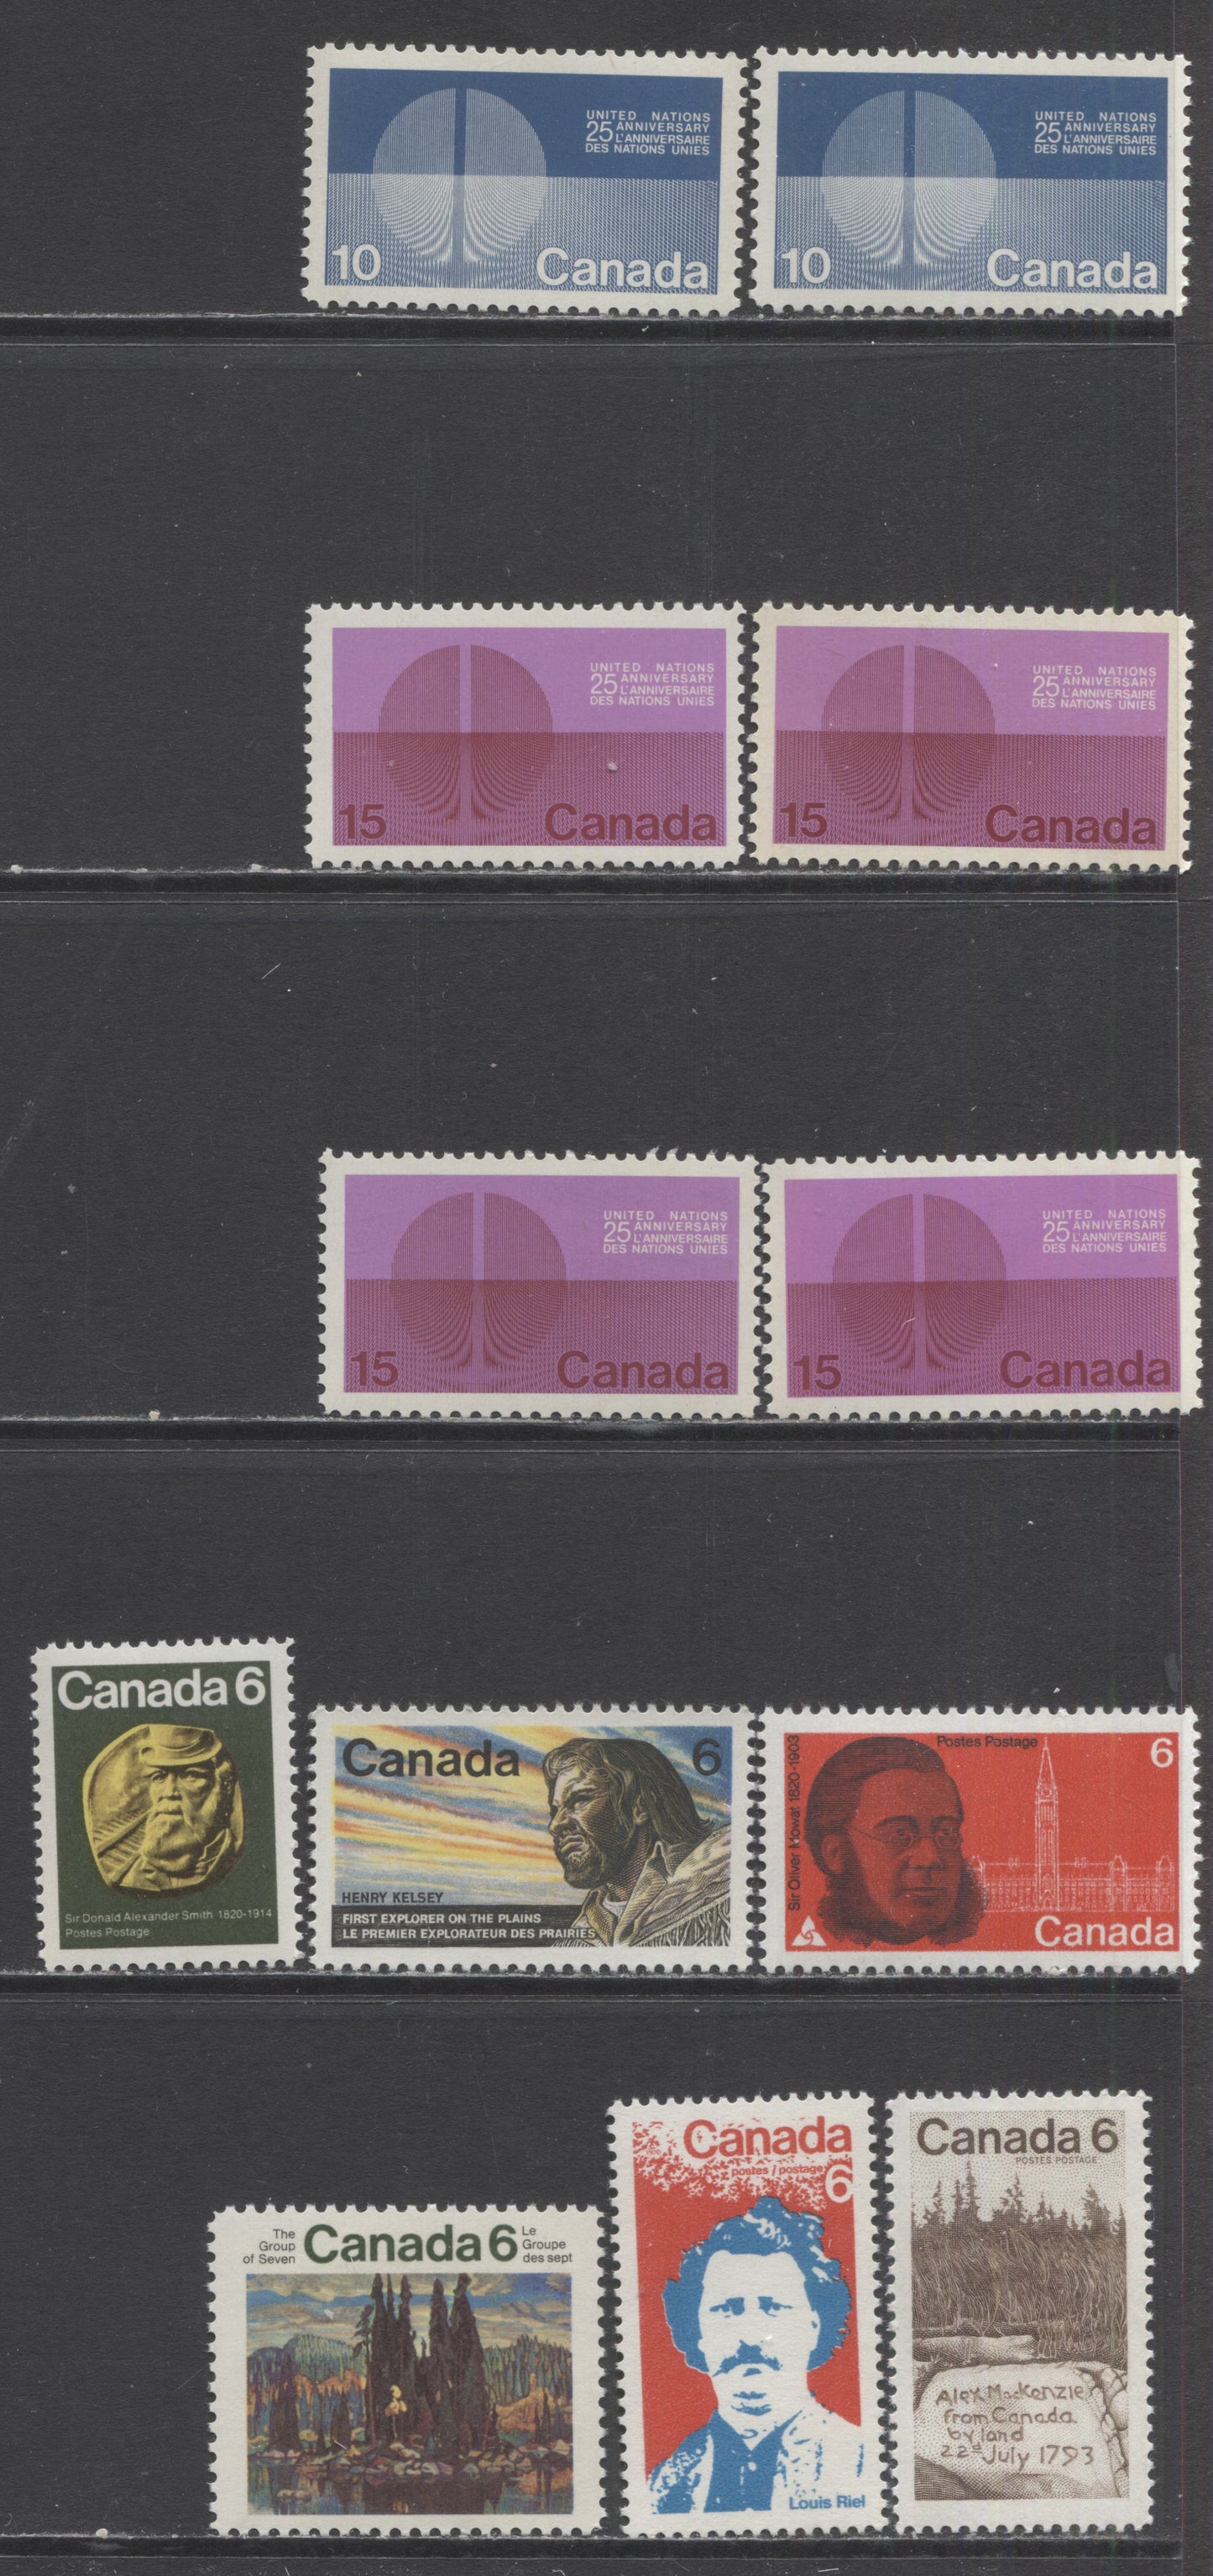 Lot 406 Canada #512-518 6c-15c Multicolored - Lilac & Dark Red Various Subjects, 1970 Commemoratives, 12 VFNH Tagged & Untagged Singles, Including Some Fluorescent Varieties